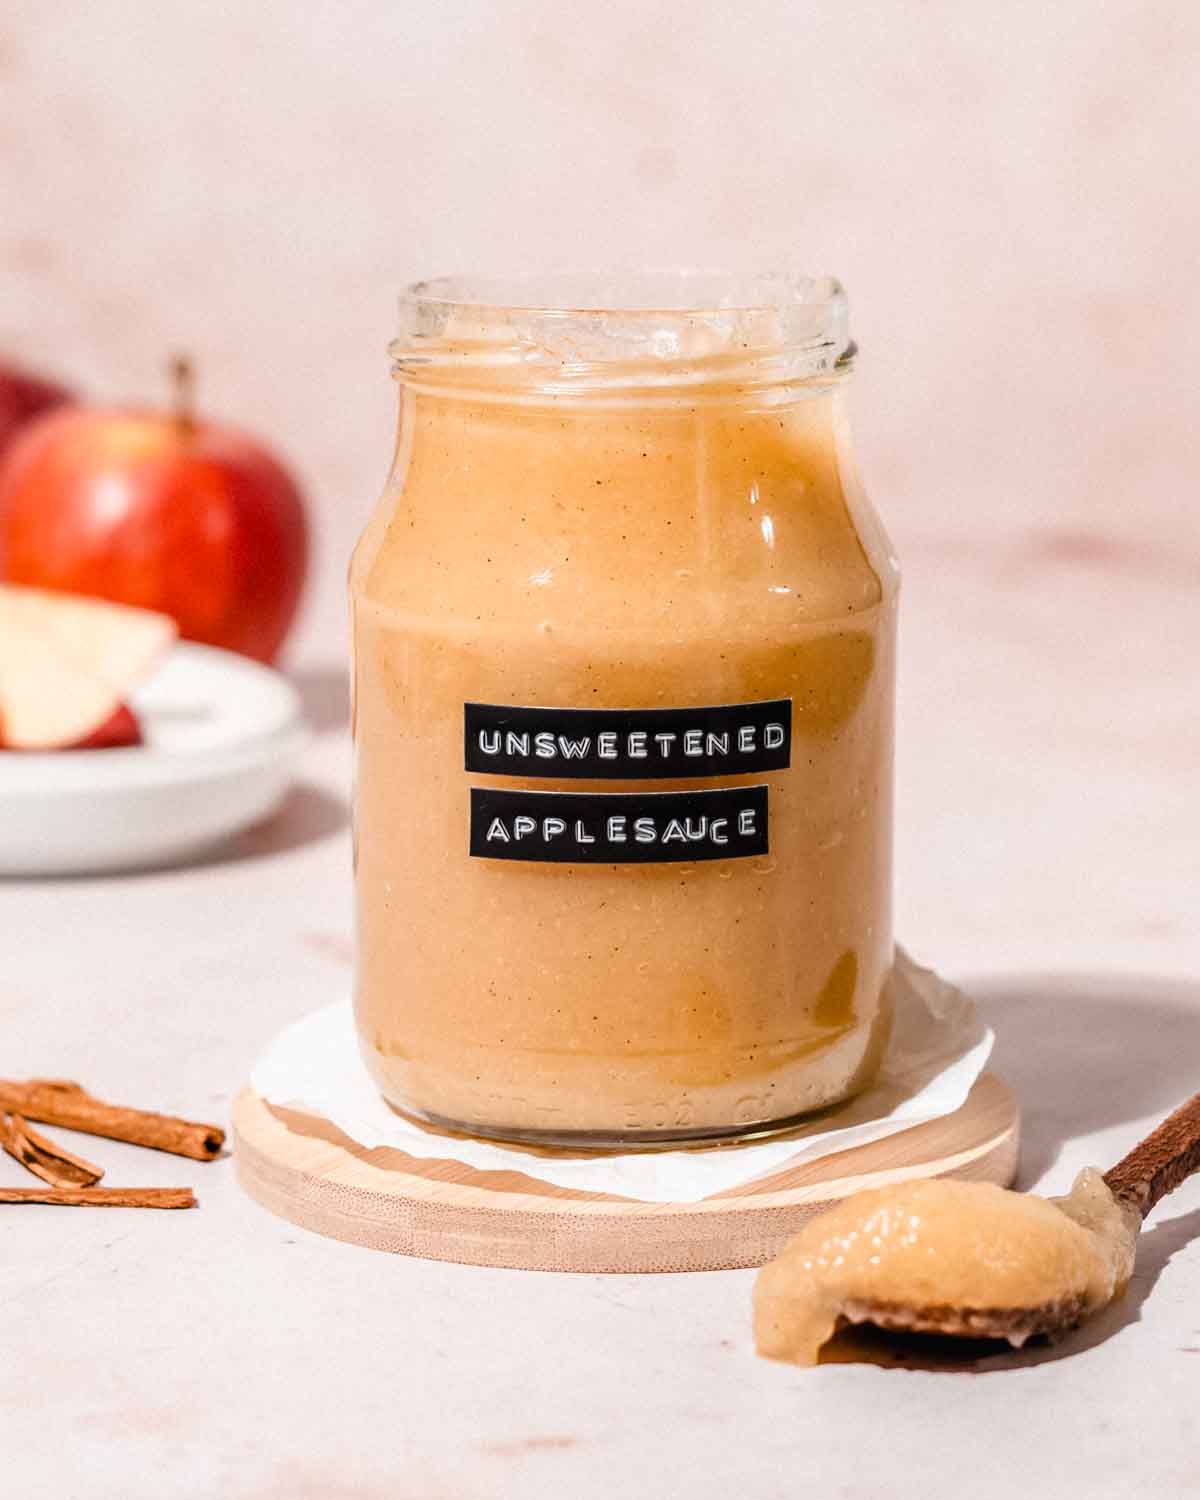 glass jar filled with unsweetened applesauce and a wooden spoon with applesauce on it next to it.